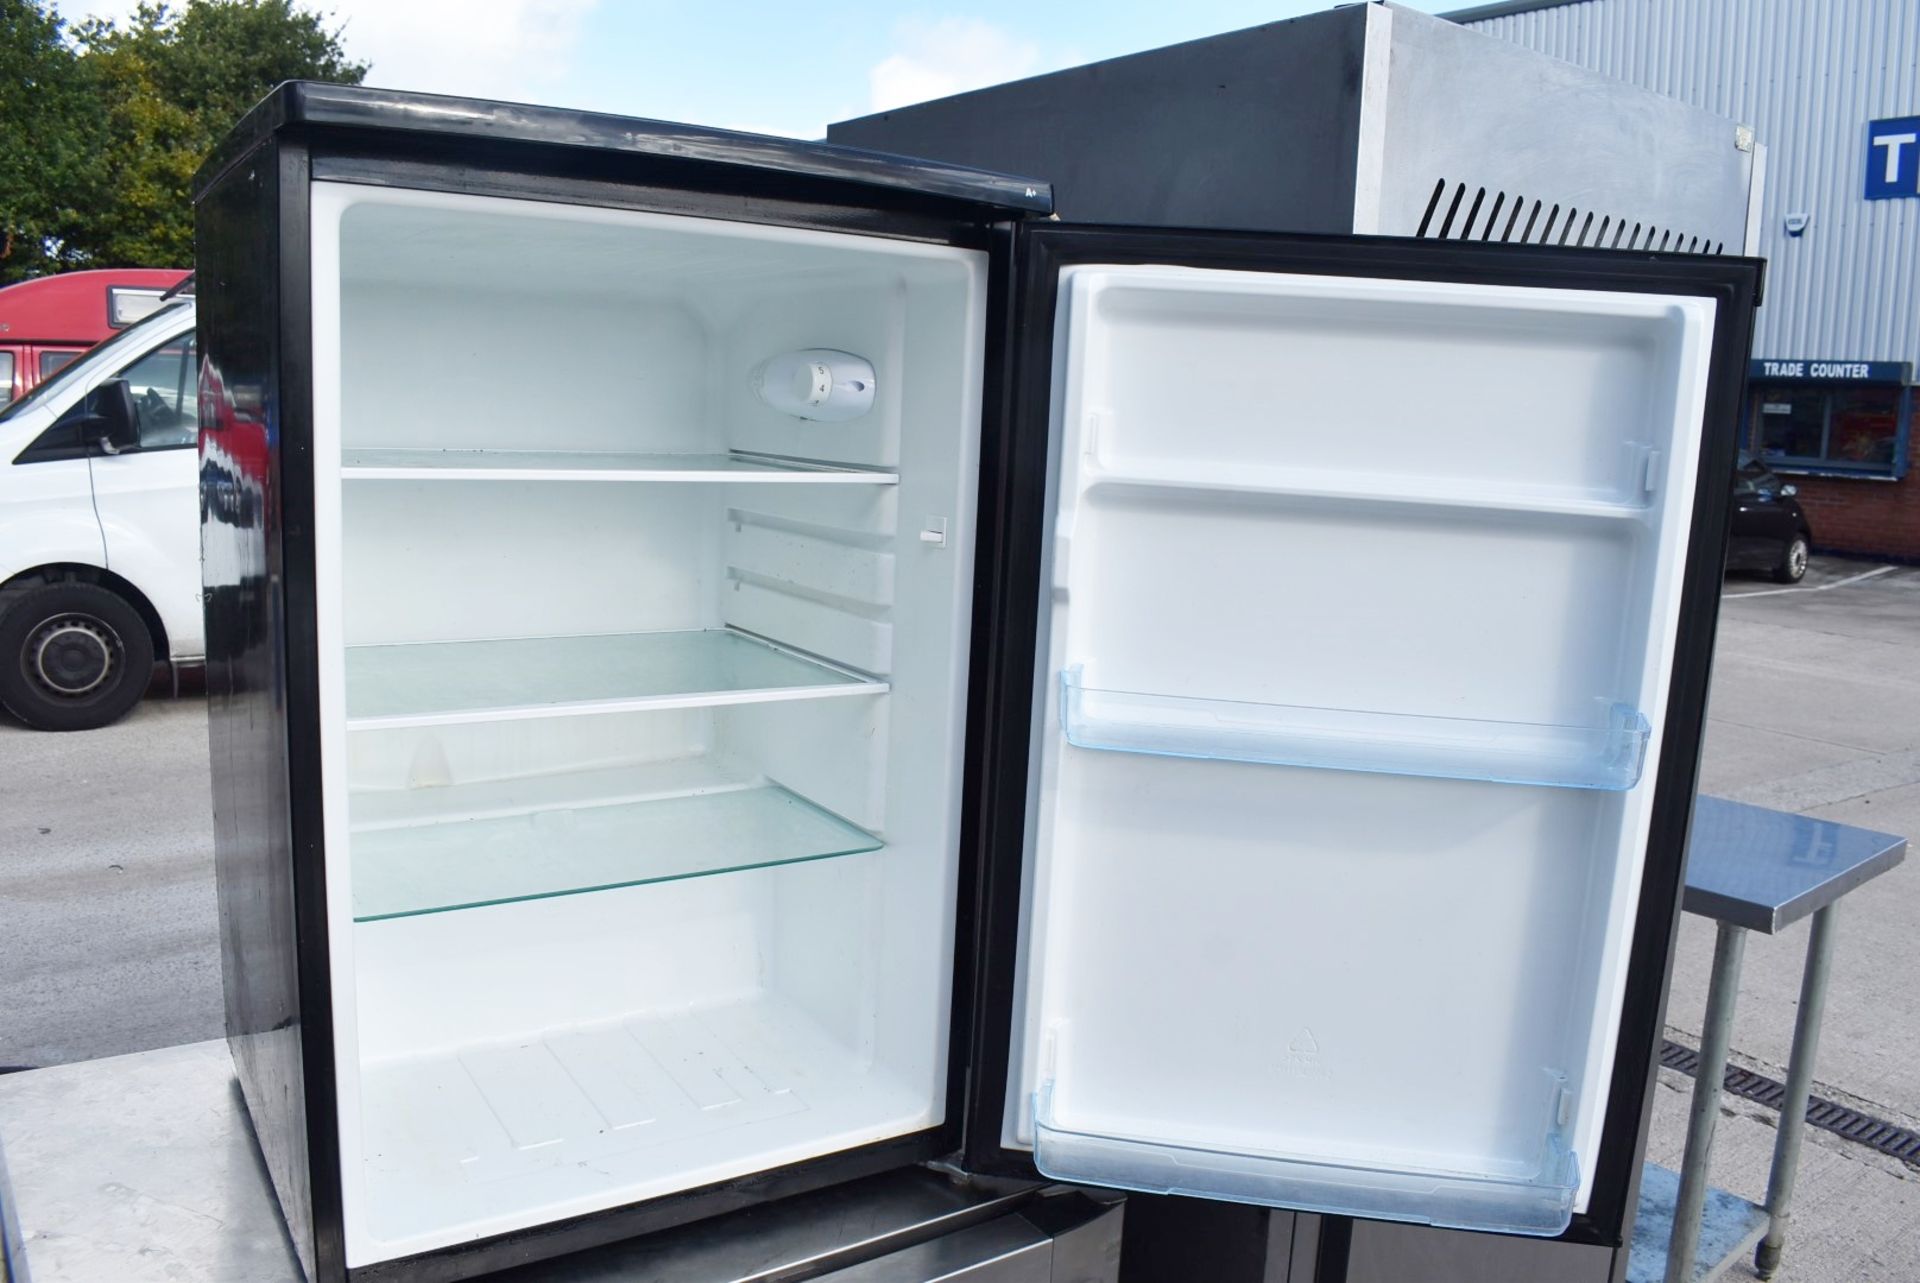 1 x LEC Undercounter Fridge in Black - Recently Removed From a Dark Kitchen Environment - Ref: DK112 - Image 3 of 3